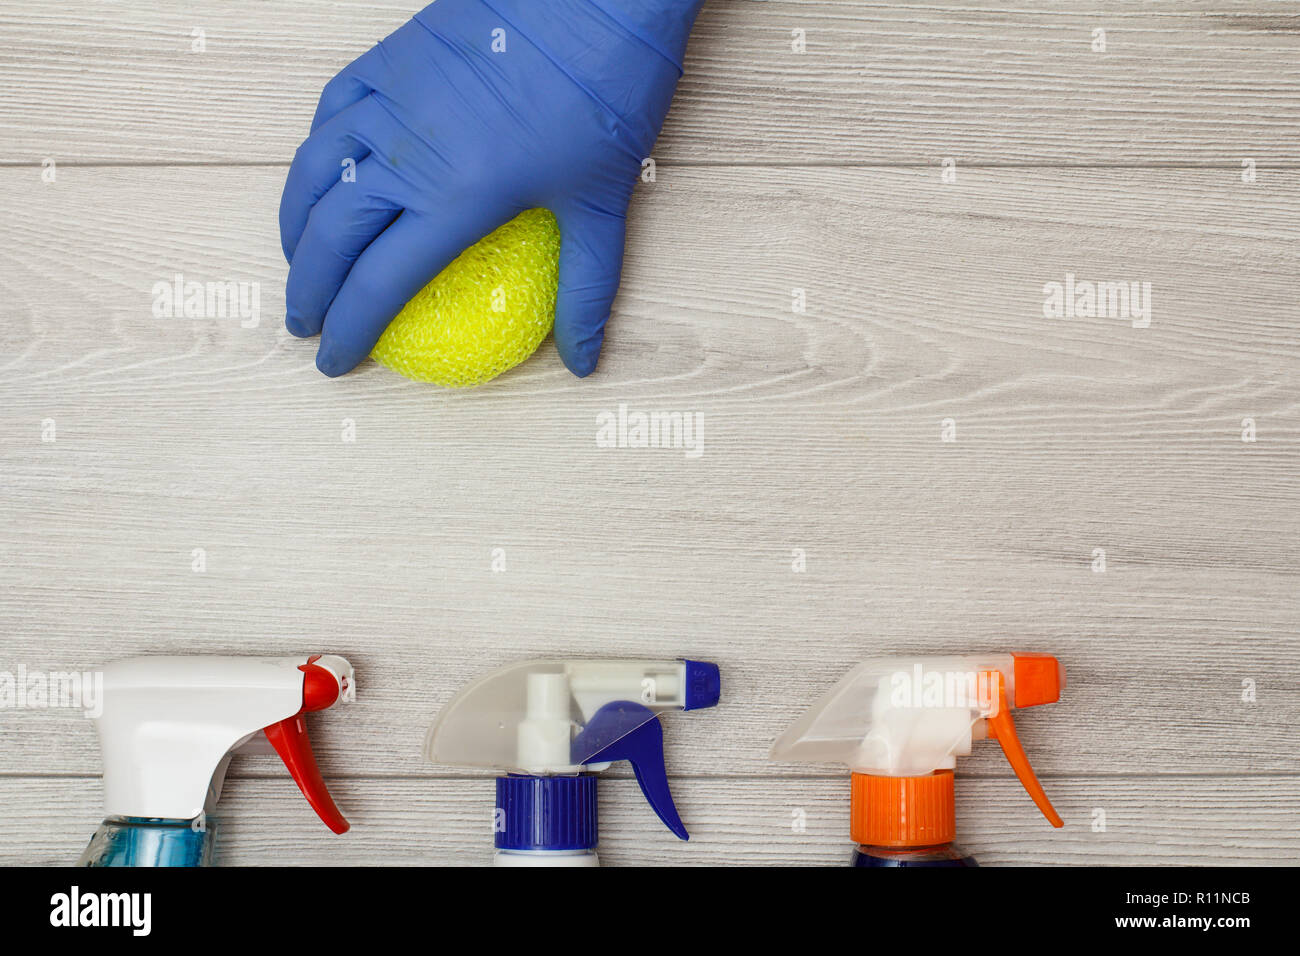 Hand in rubber glove holding synthetic sponge for cleaning with bottles of detergent on wooden boards. Top view Stock Photo